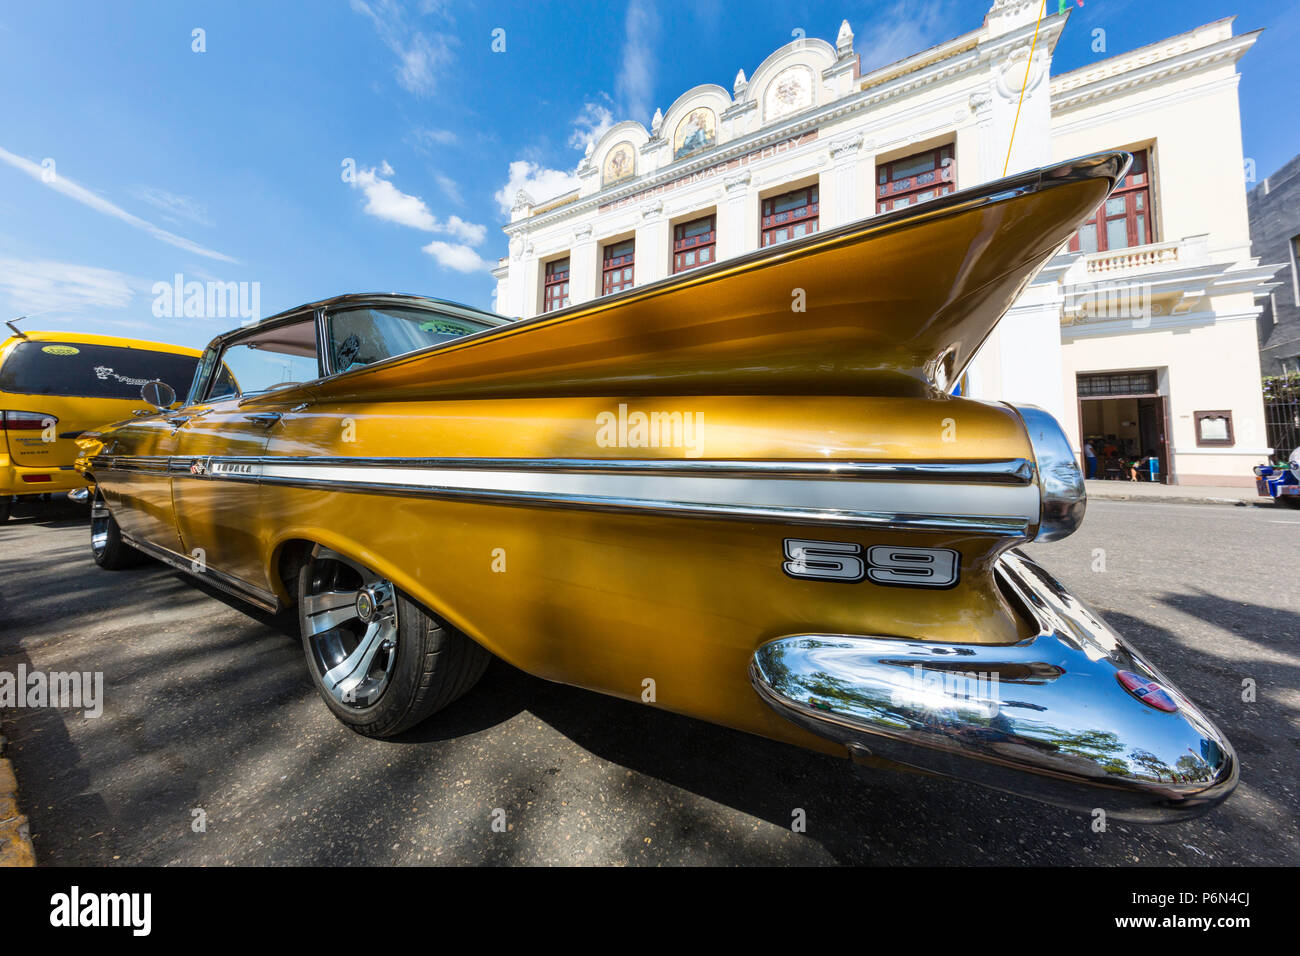 Classic 1959 Chevrolet Impala taxi, locally known as 'almendrones' in the town of Cienfuegos, Cuba. Stock Photo